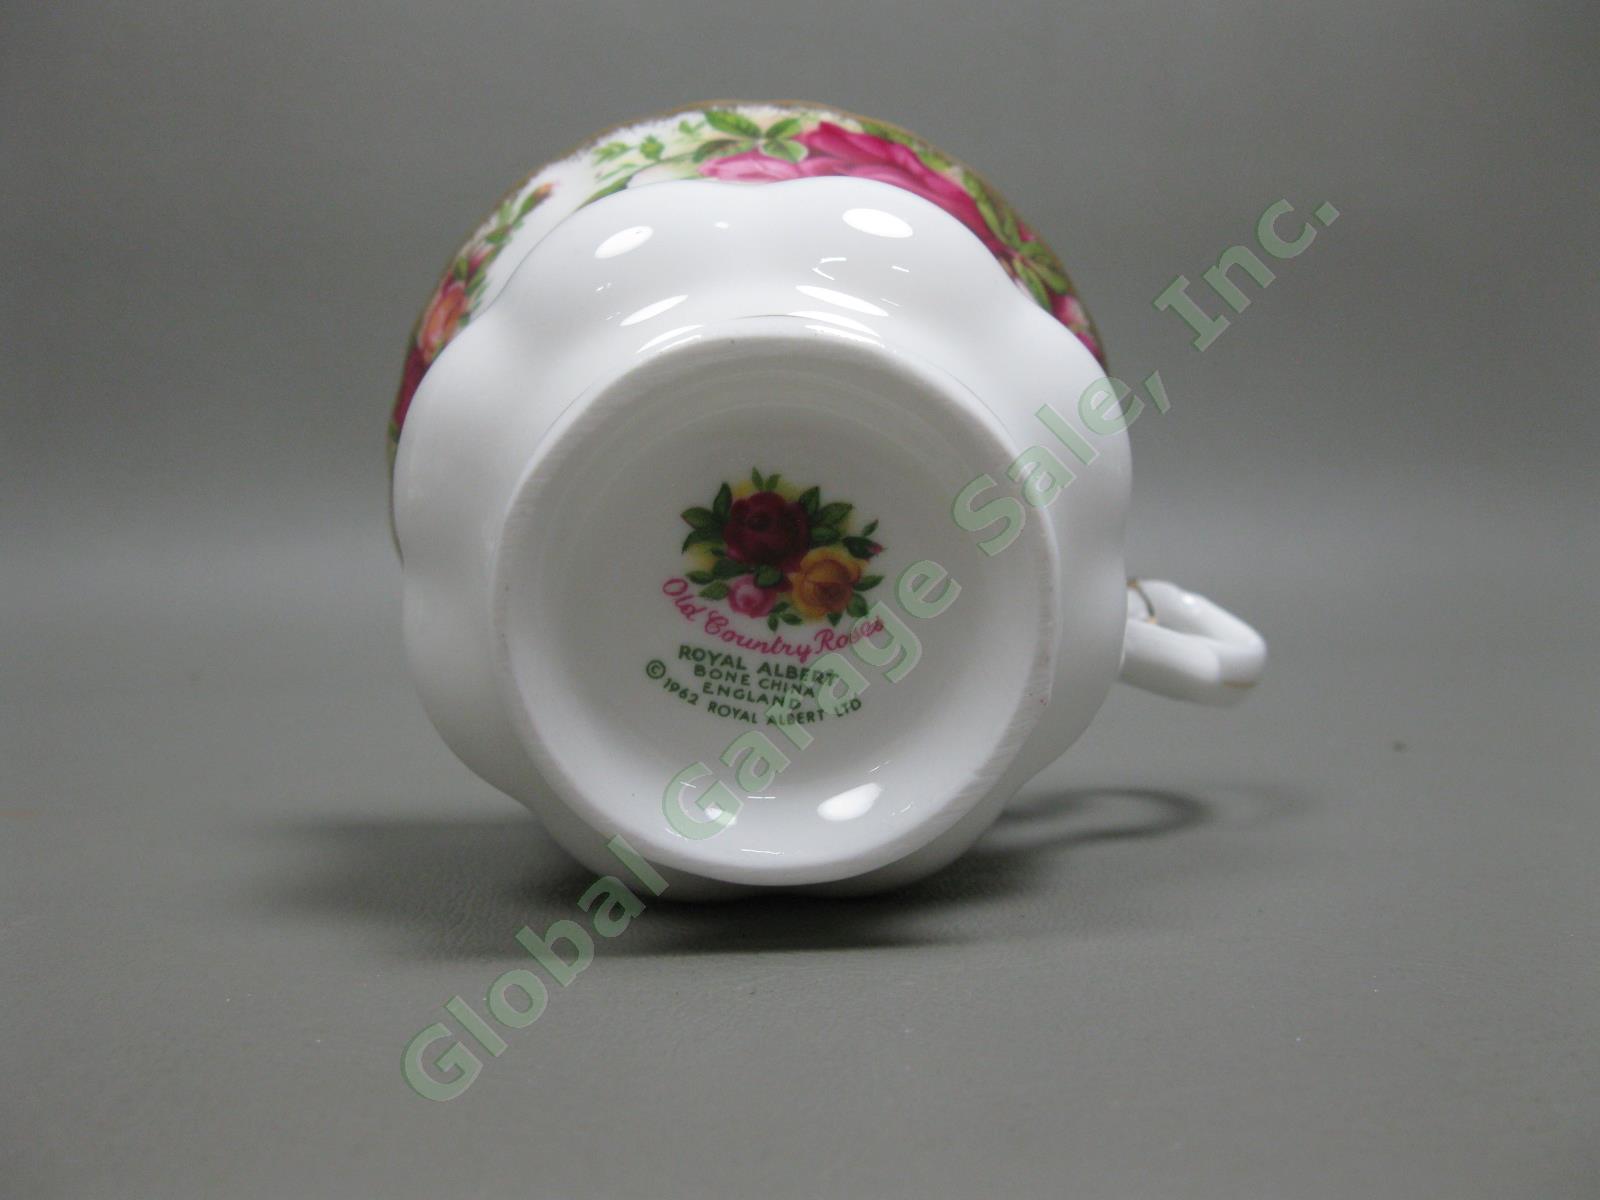 8 Royal Albert Old Country Roses Footed Tea Cup/Saucer Gold Trim Bone China Set 6